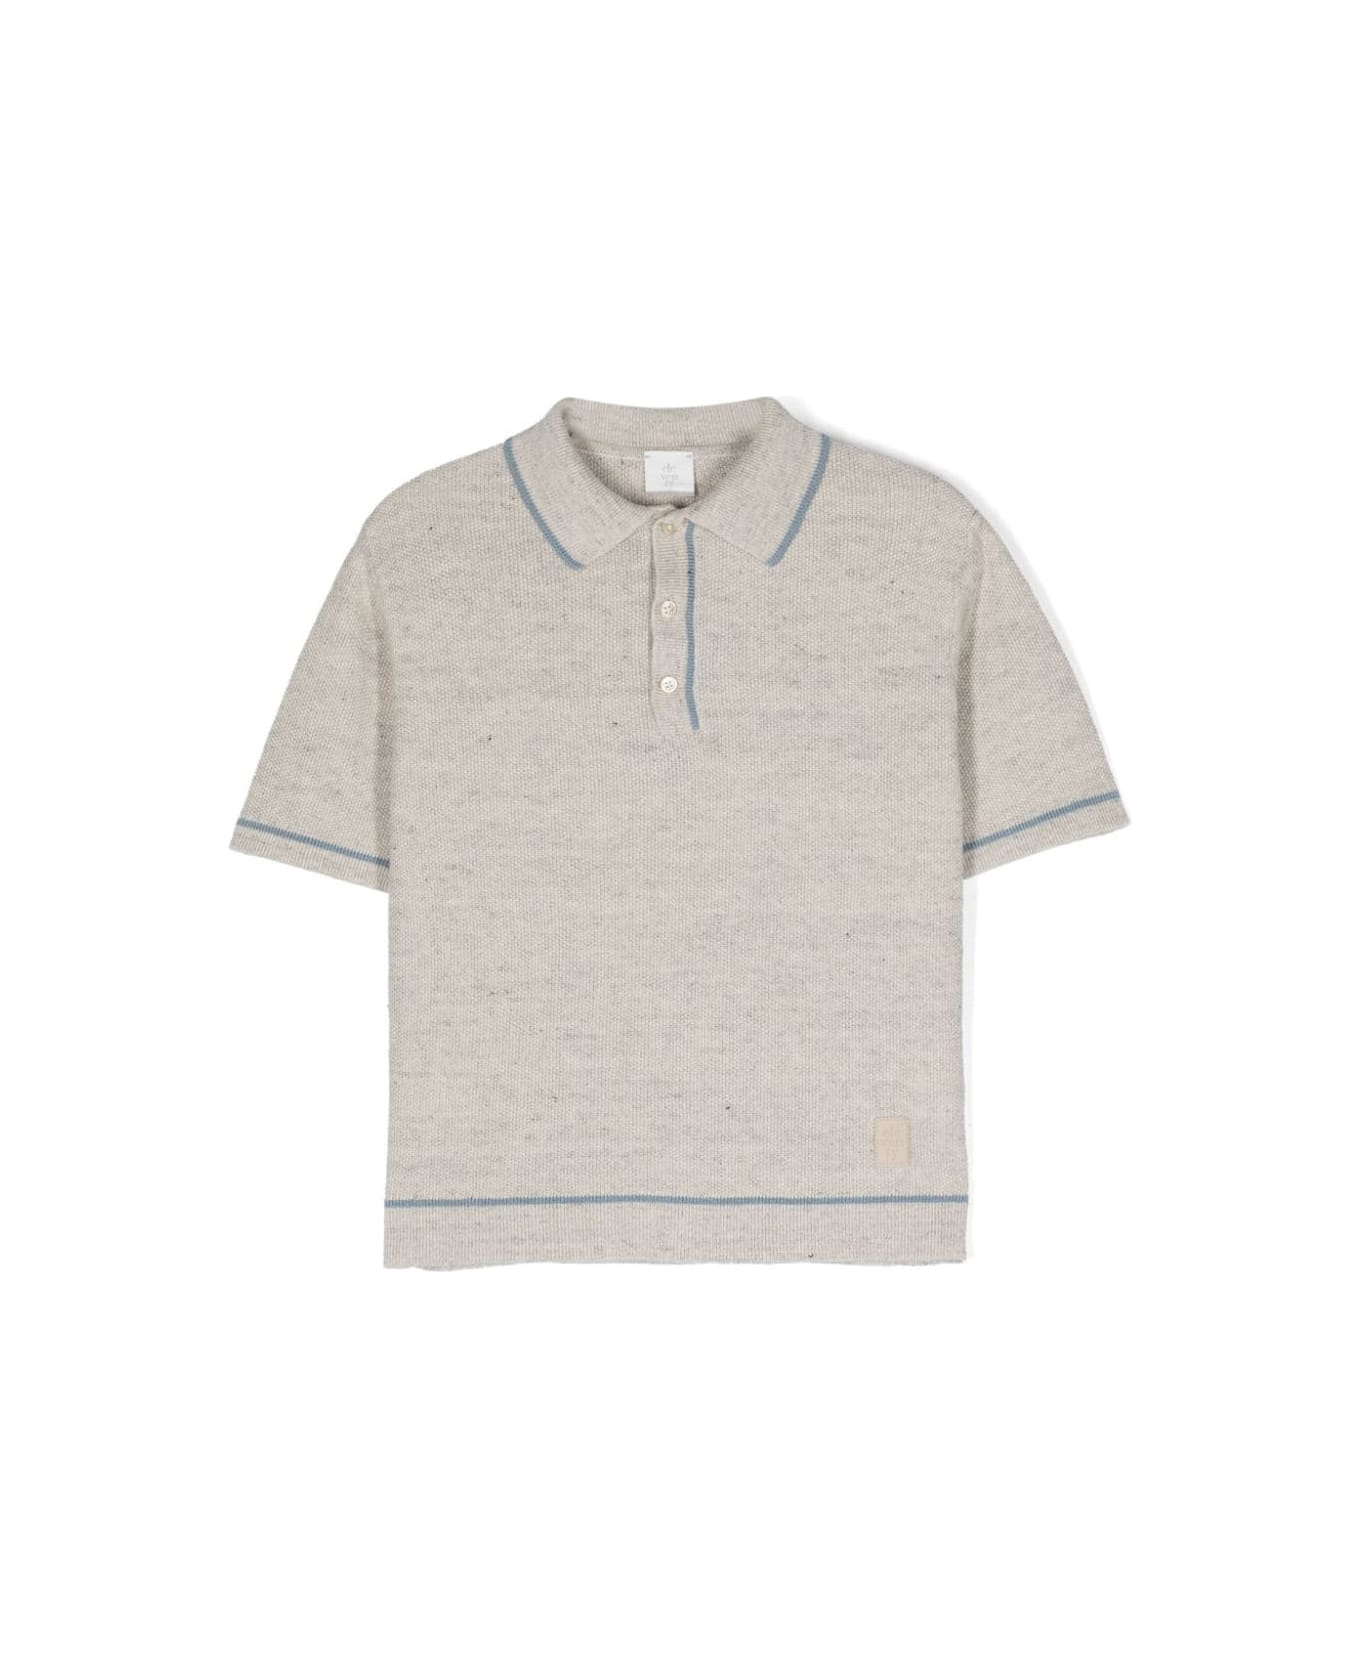 Eleventy Grey Knitted Polo Shirt With Blue Stripes - Grey Tシャツ＆ポロシャツ